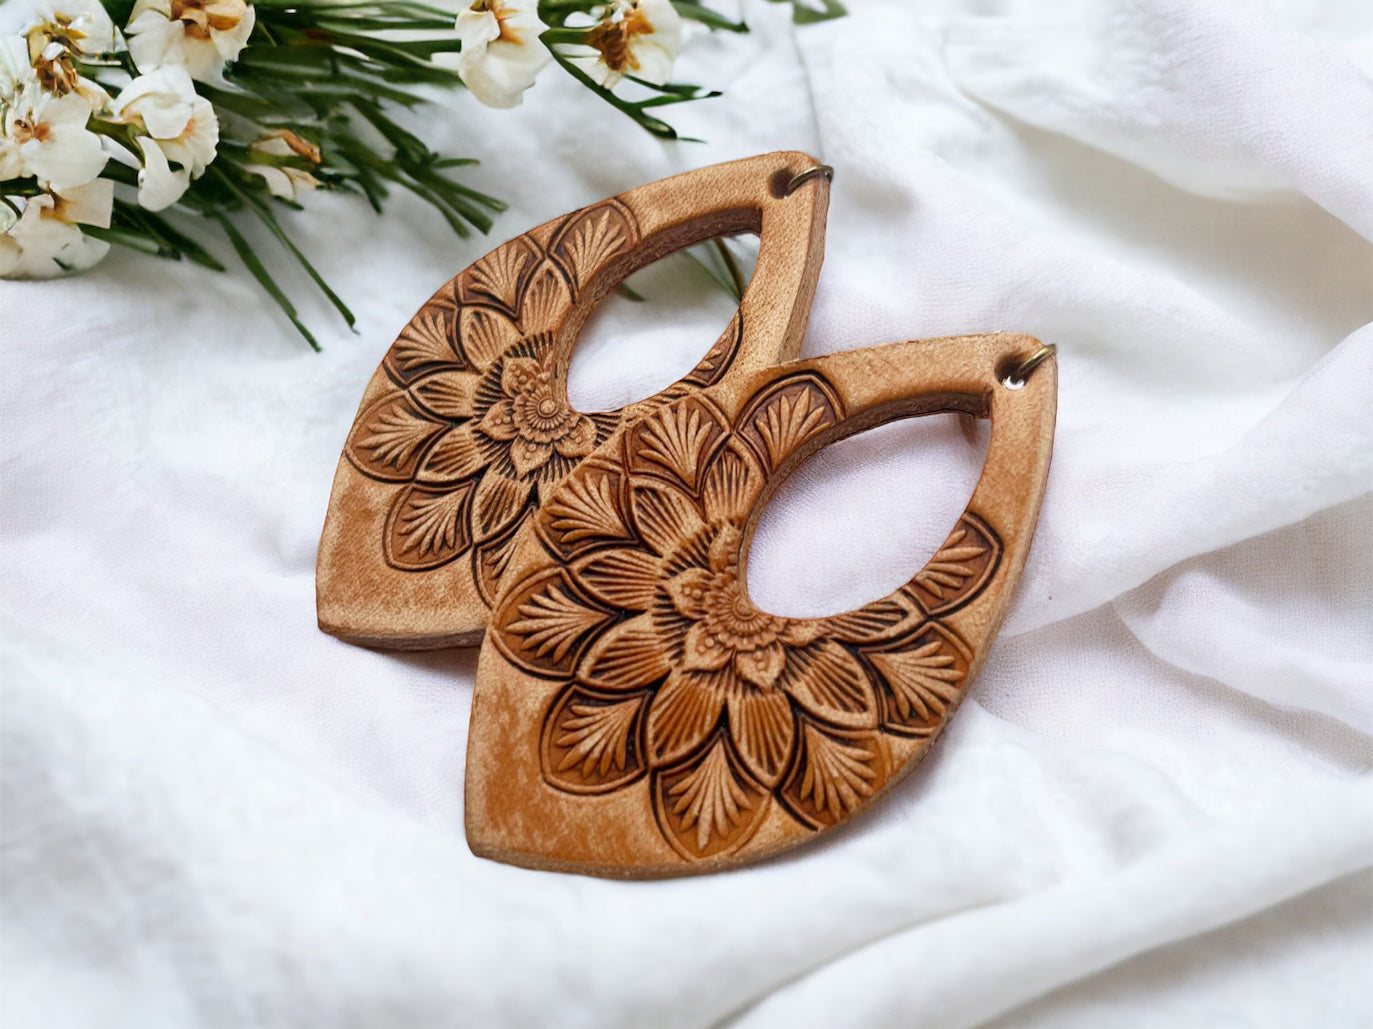 Tooled Leather Earrings- Floral Crystals/ Natural